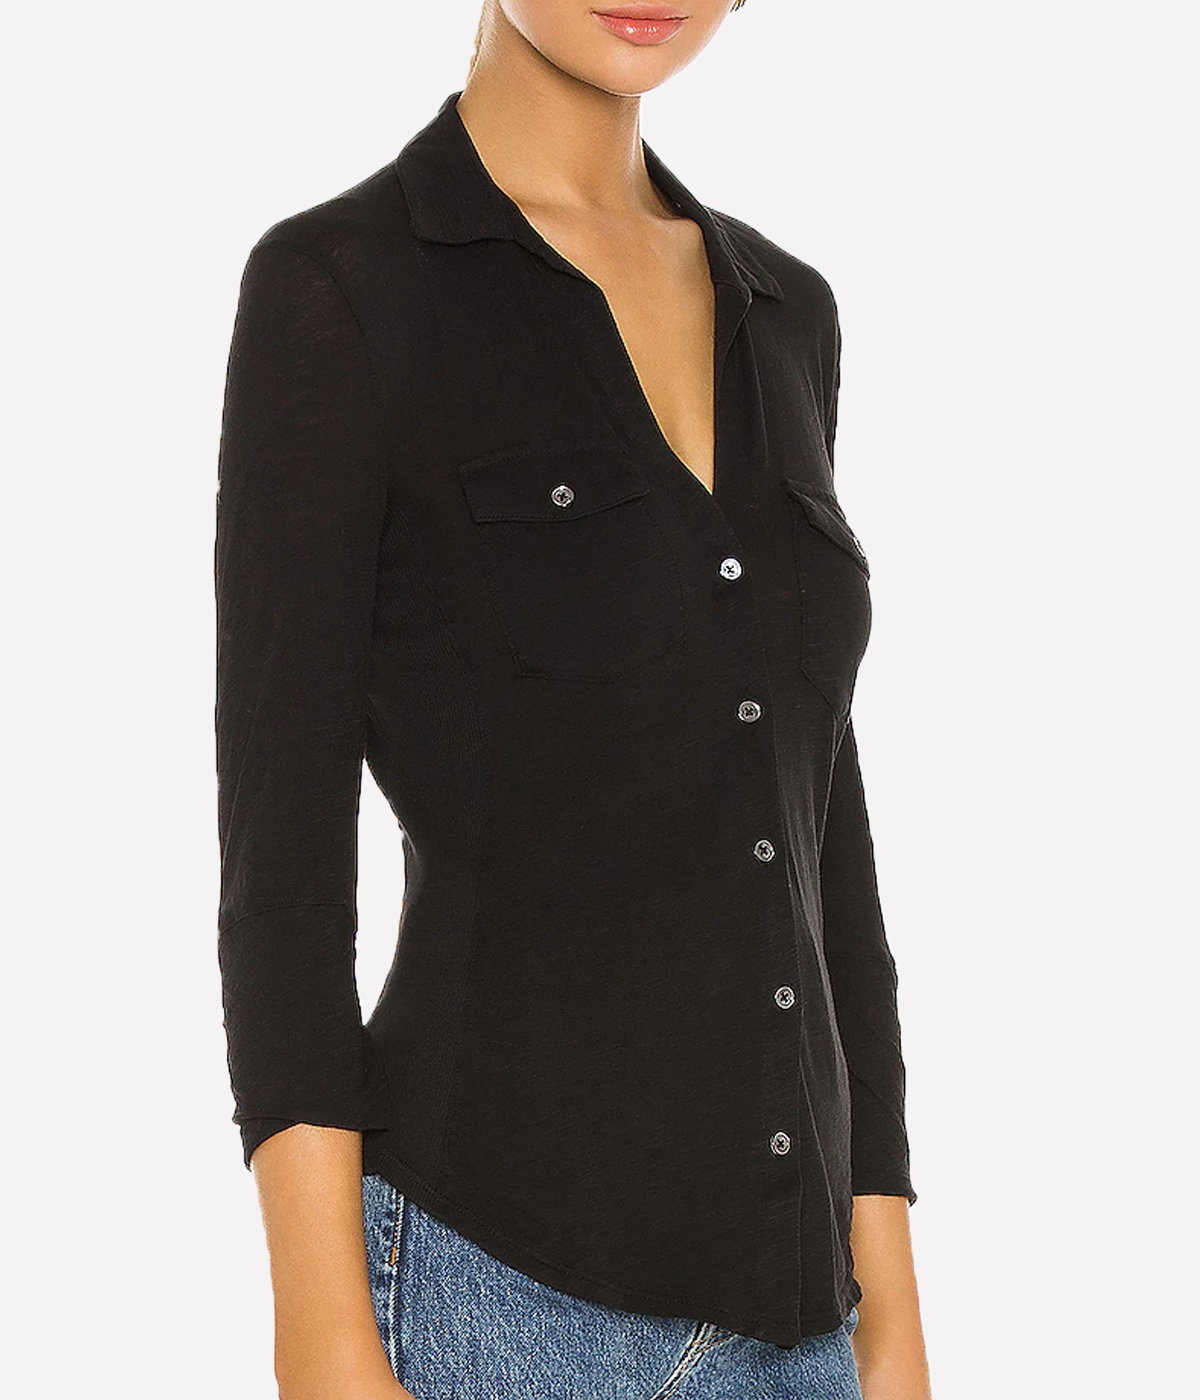 Contrast Panel Shirt in Black